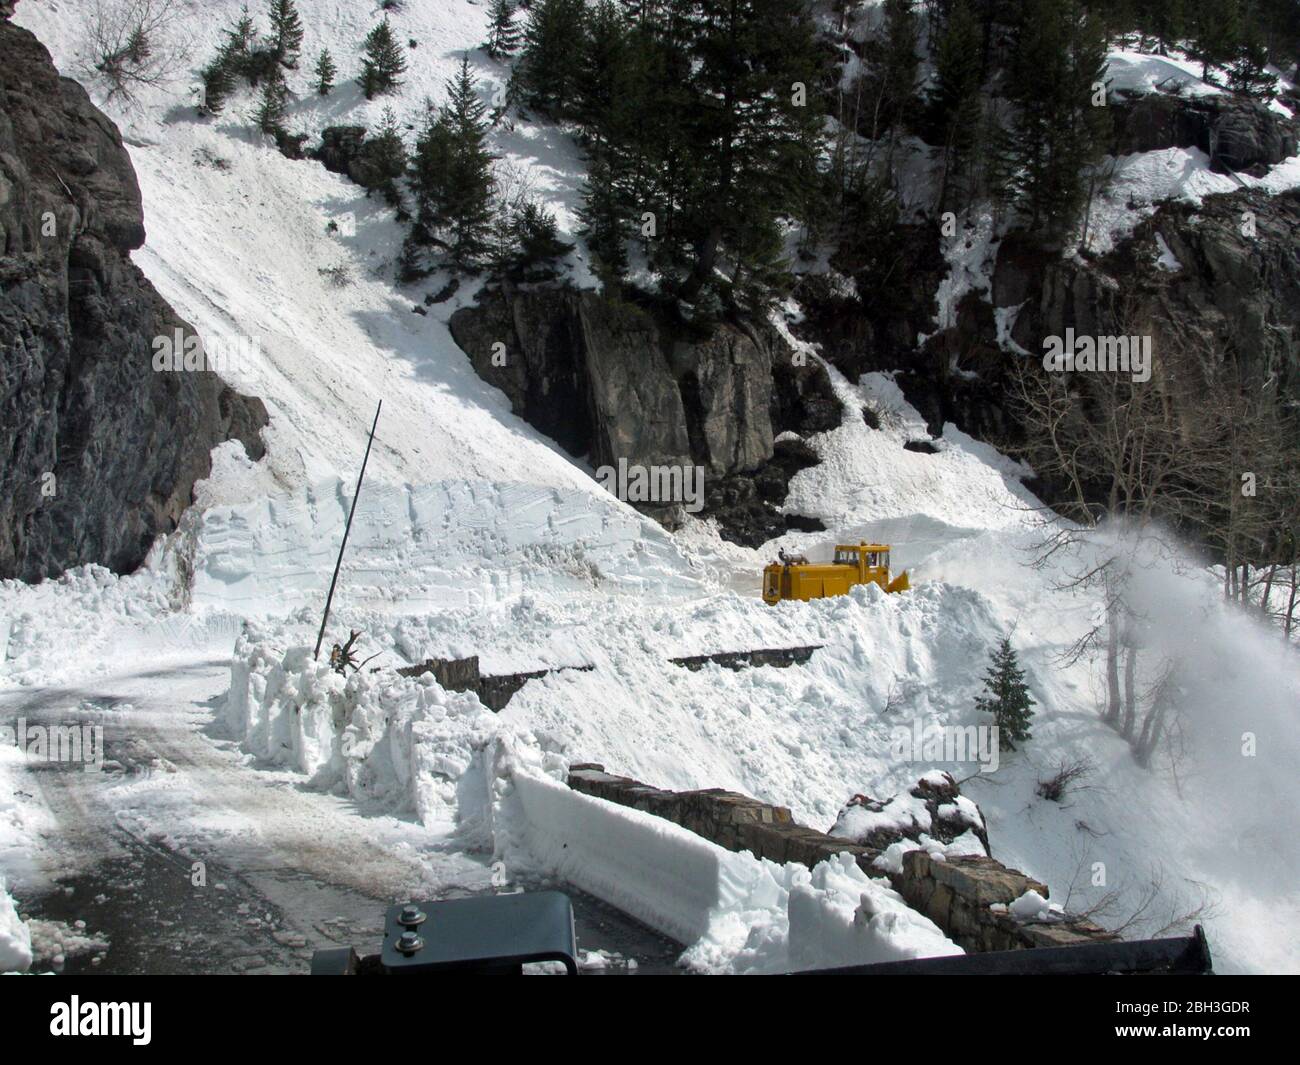 Snow removal equipment along the winding Going-To-The-Sun road at an elevation of 6,646 feet in Glacier National Park April 21, 2020 in Glacier, Montana. Road clearing continues despite the park being closed to visitors due to the COVID-19, coronavirus pandemic. Stock Photo